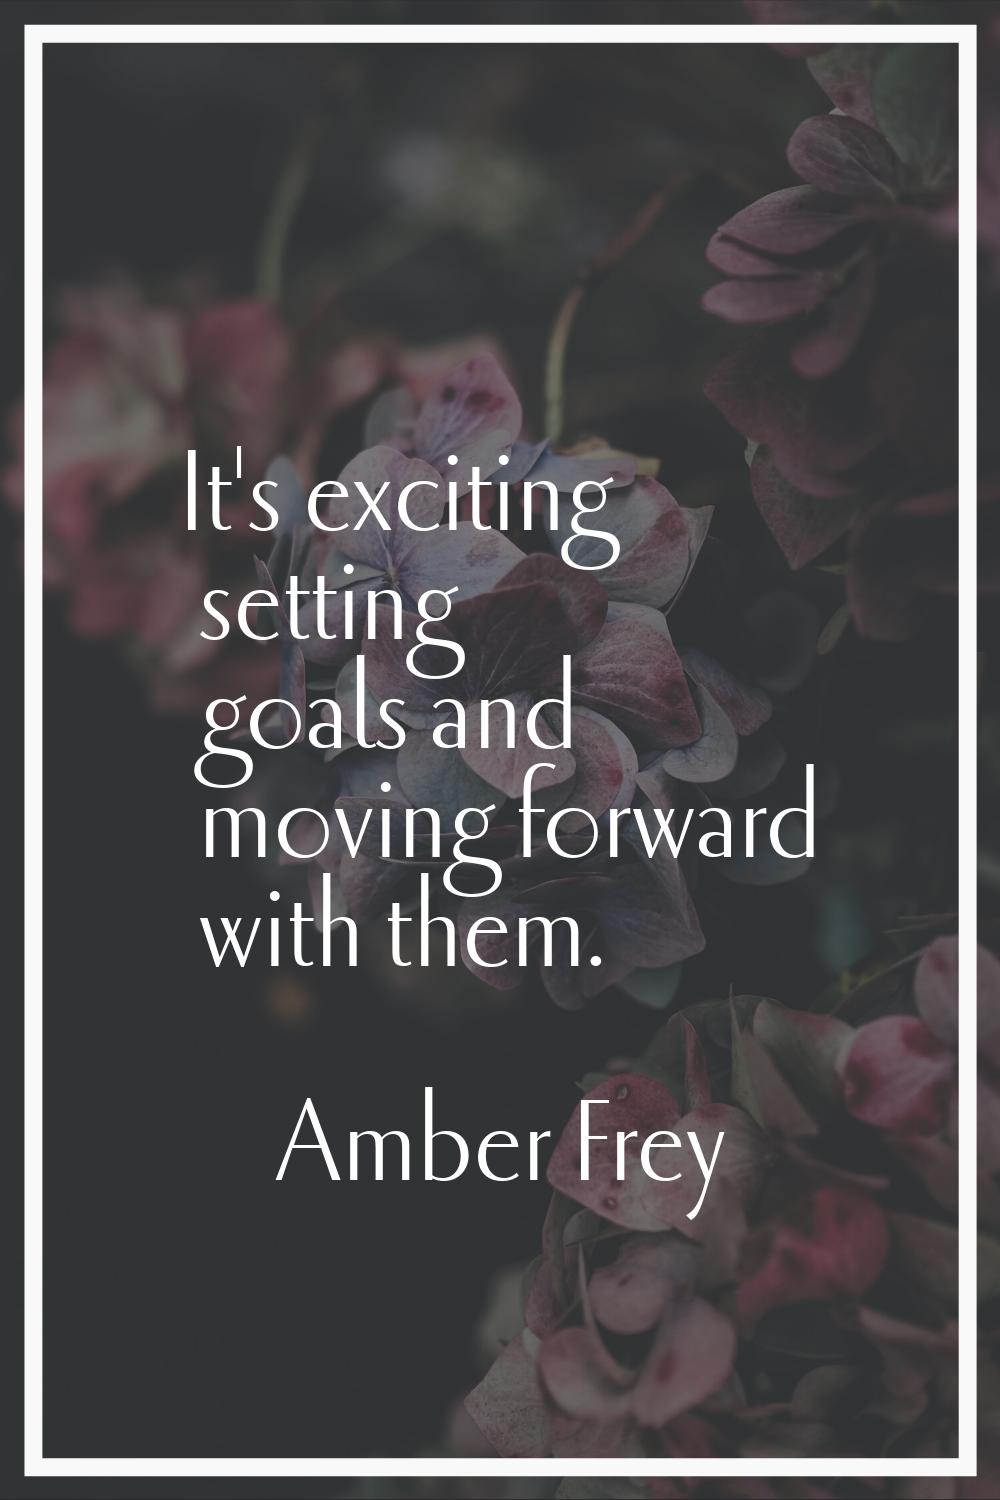 It's exciting setting goals and moving forward with them.